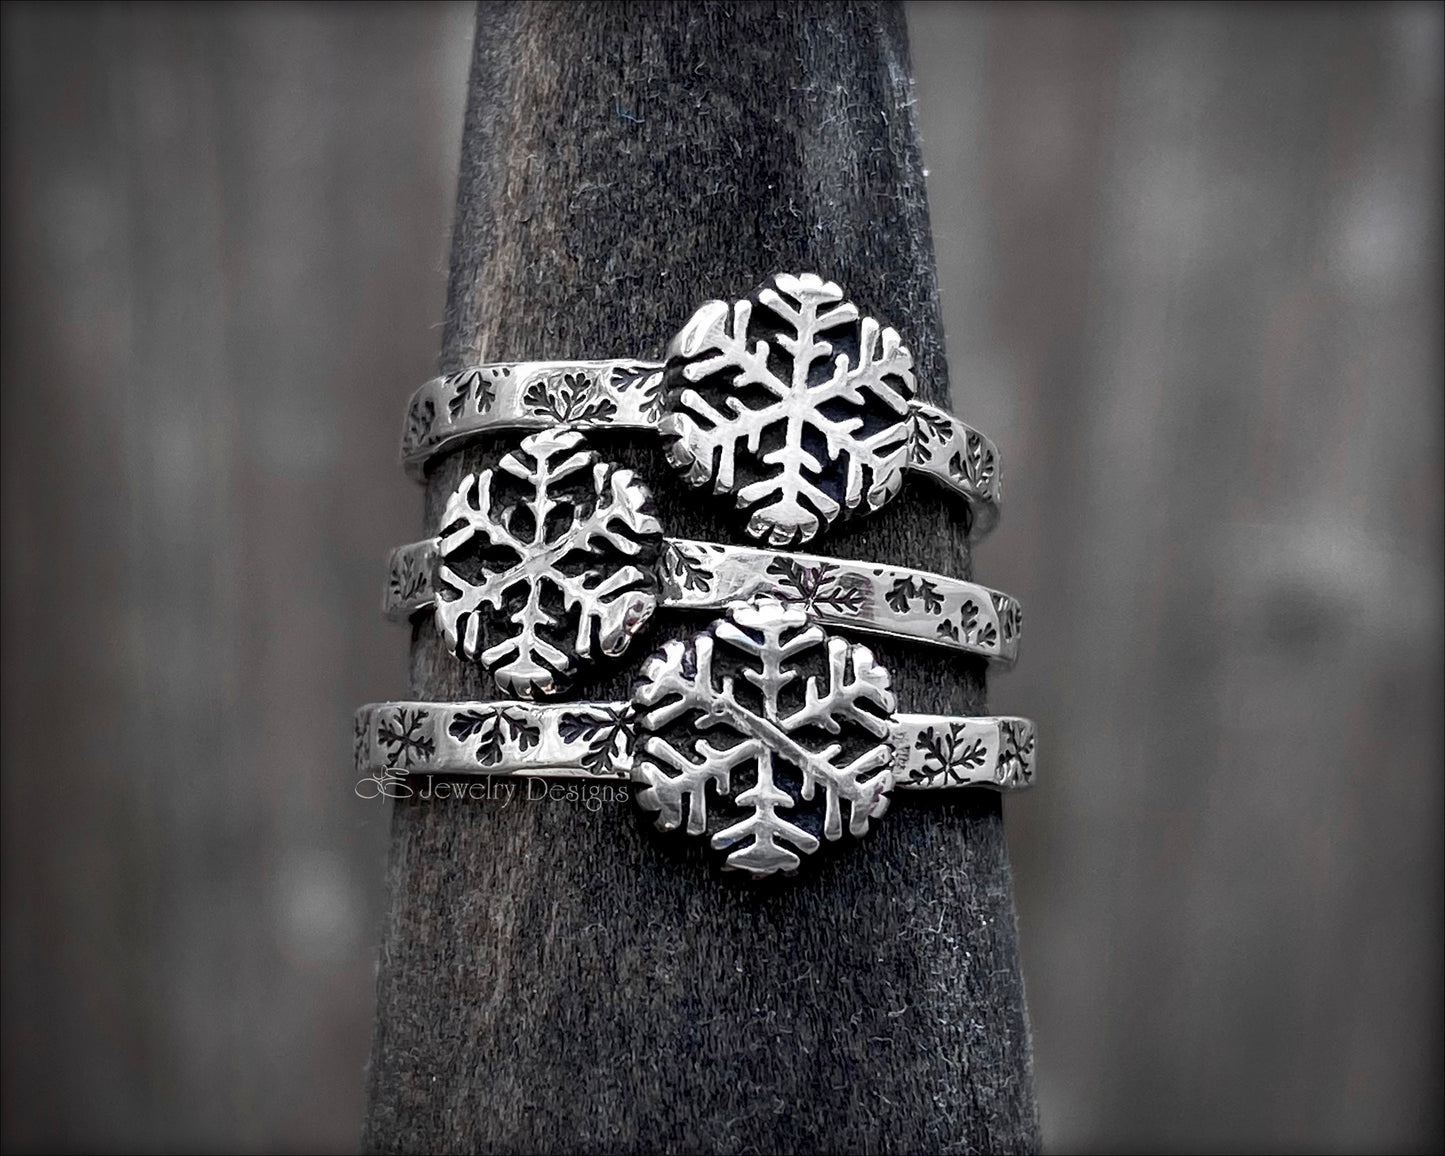 Sterling Silver Snowflake Ring - LE Jewelry Designs